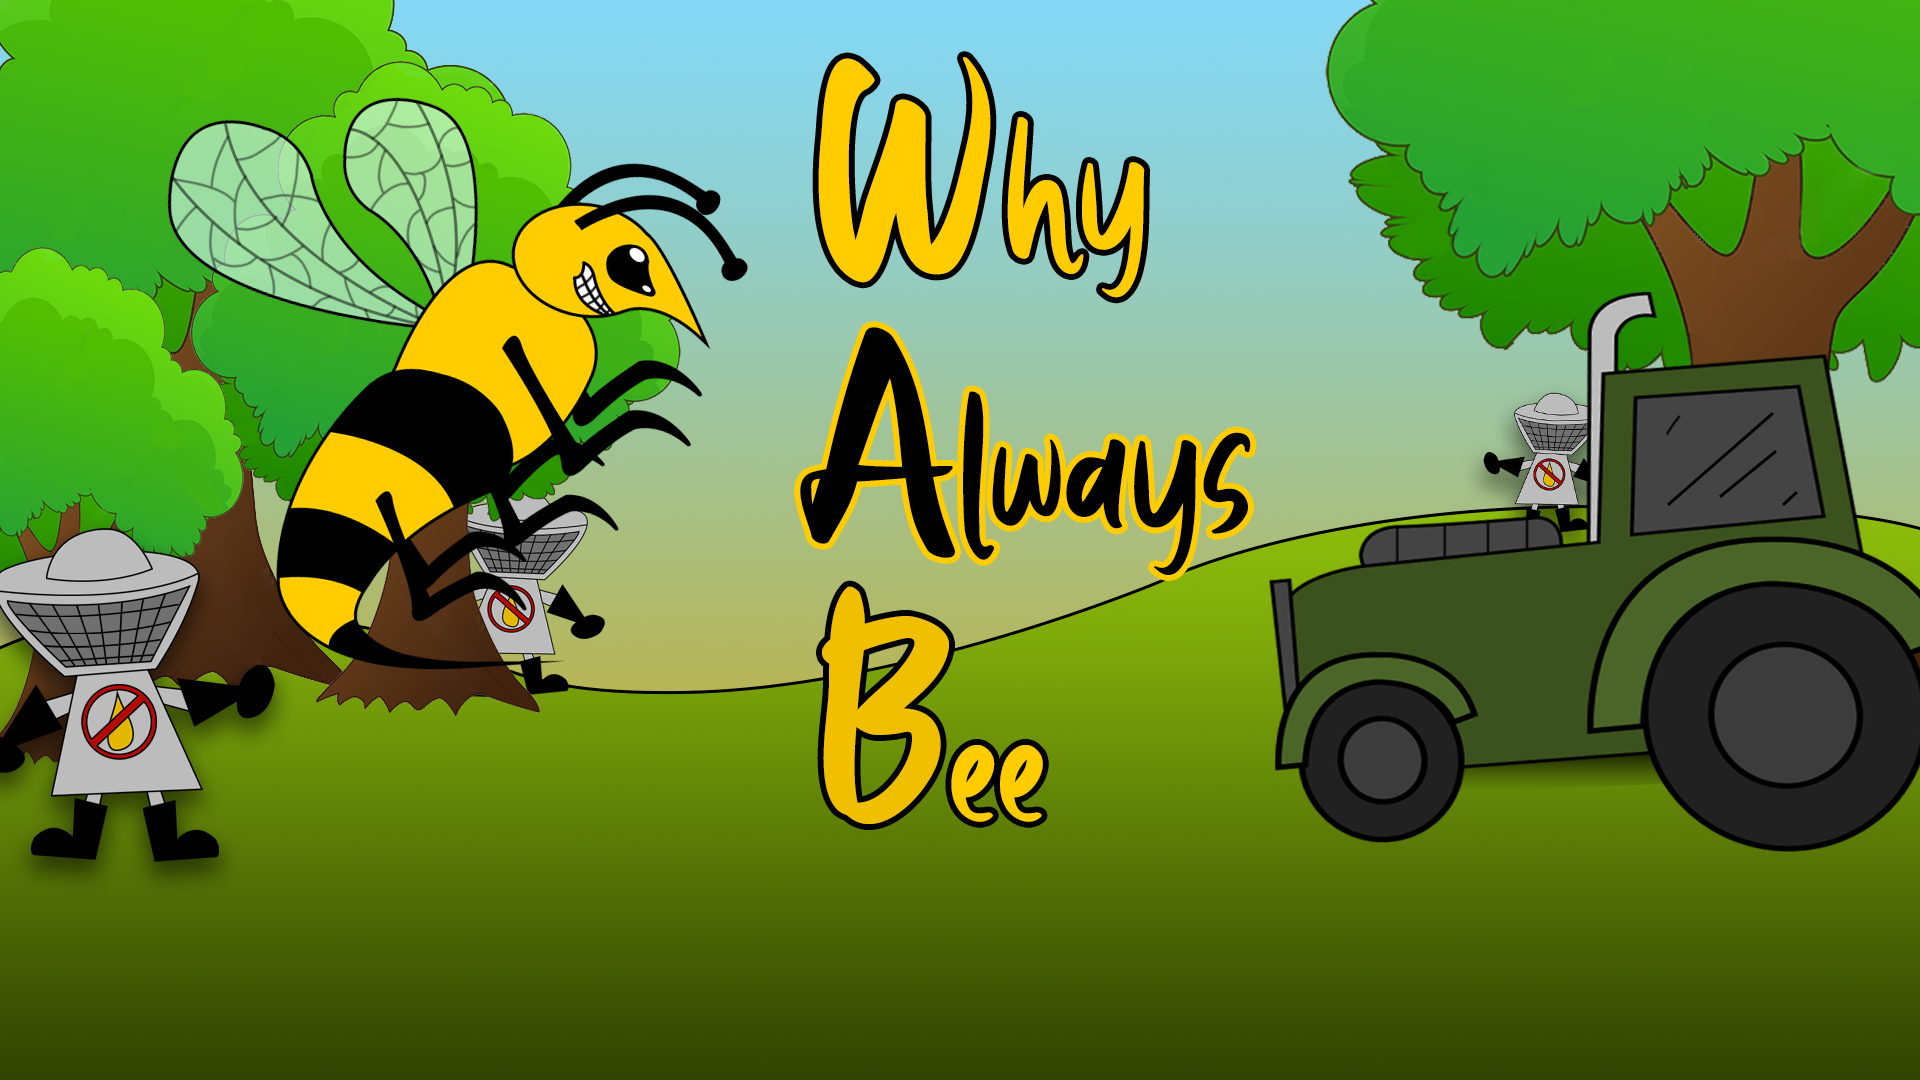 Why Always Bee?